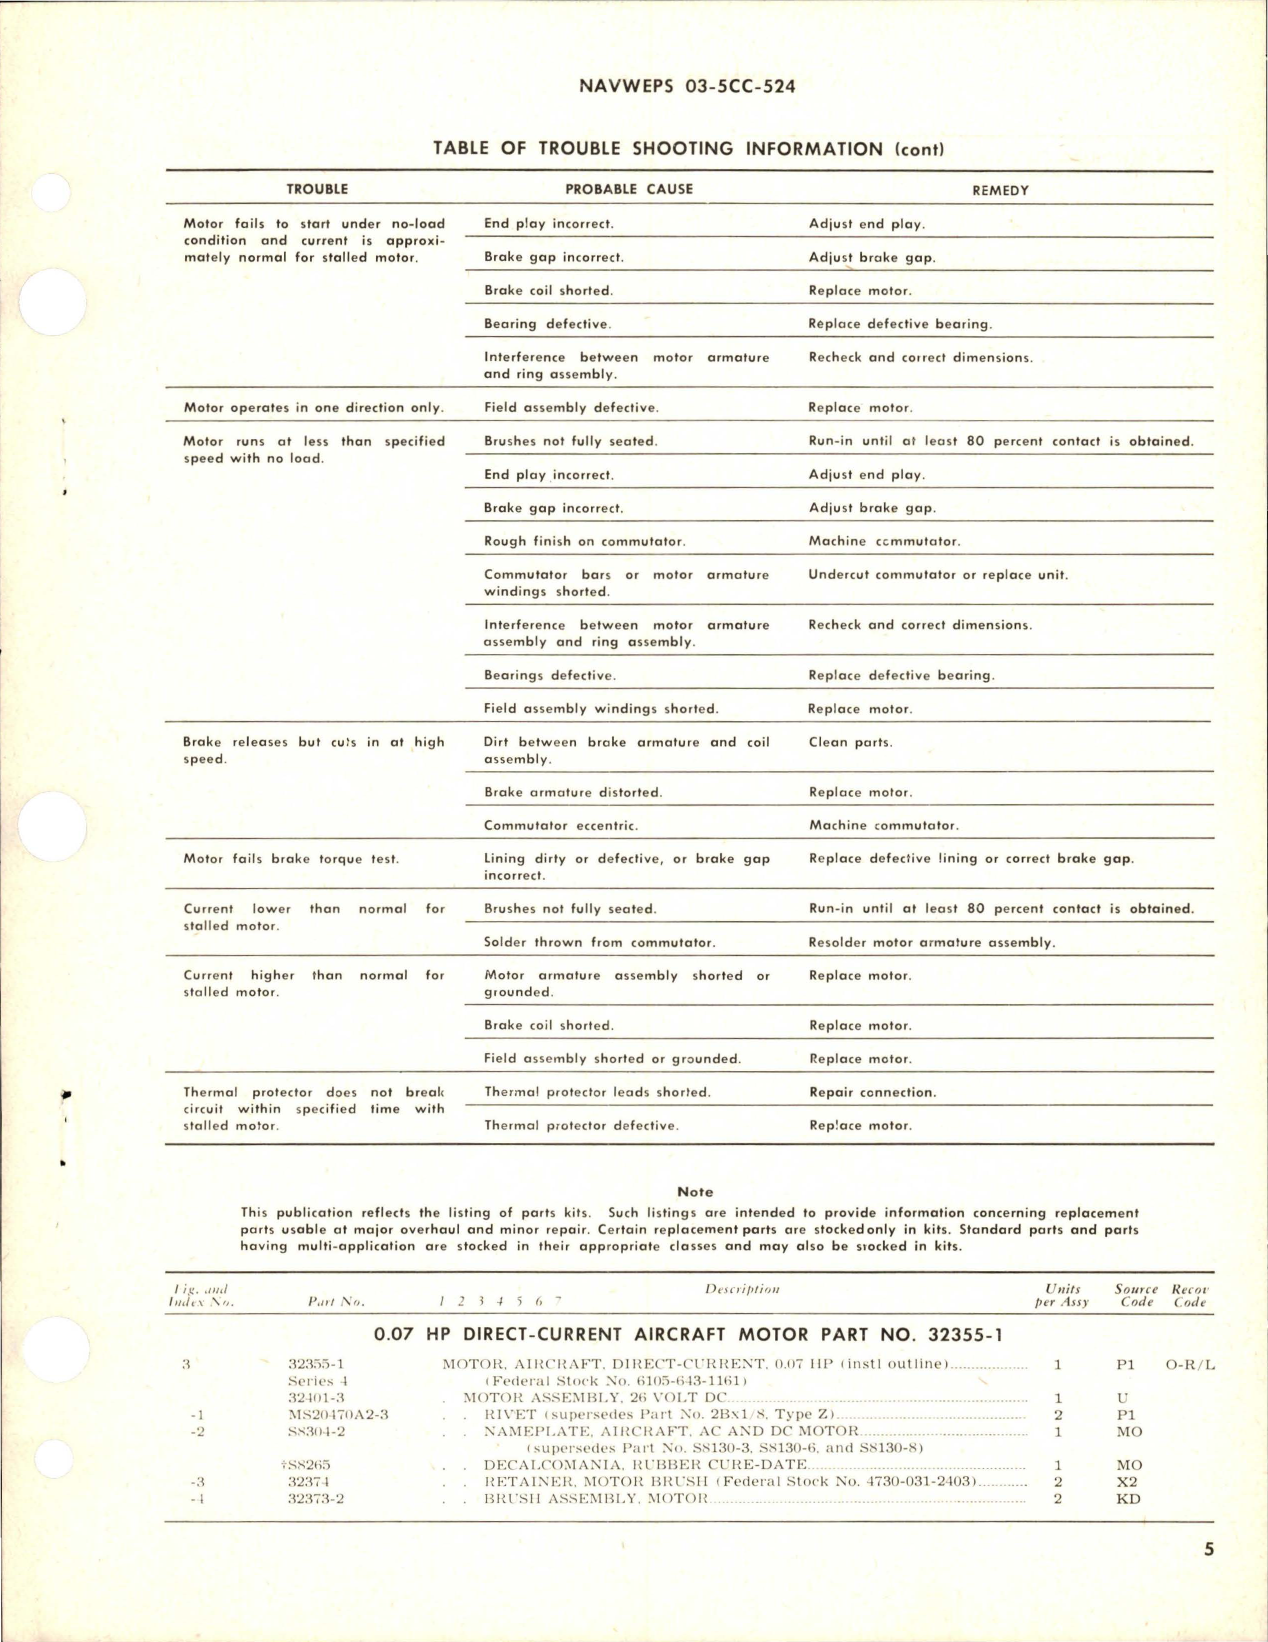 Sample page 5 from AirCorps Library document: Overhaul Instructions with Parts Breakdown for Direct Current Aircraft Motor - 0.07 HP - Part 32355-1